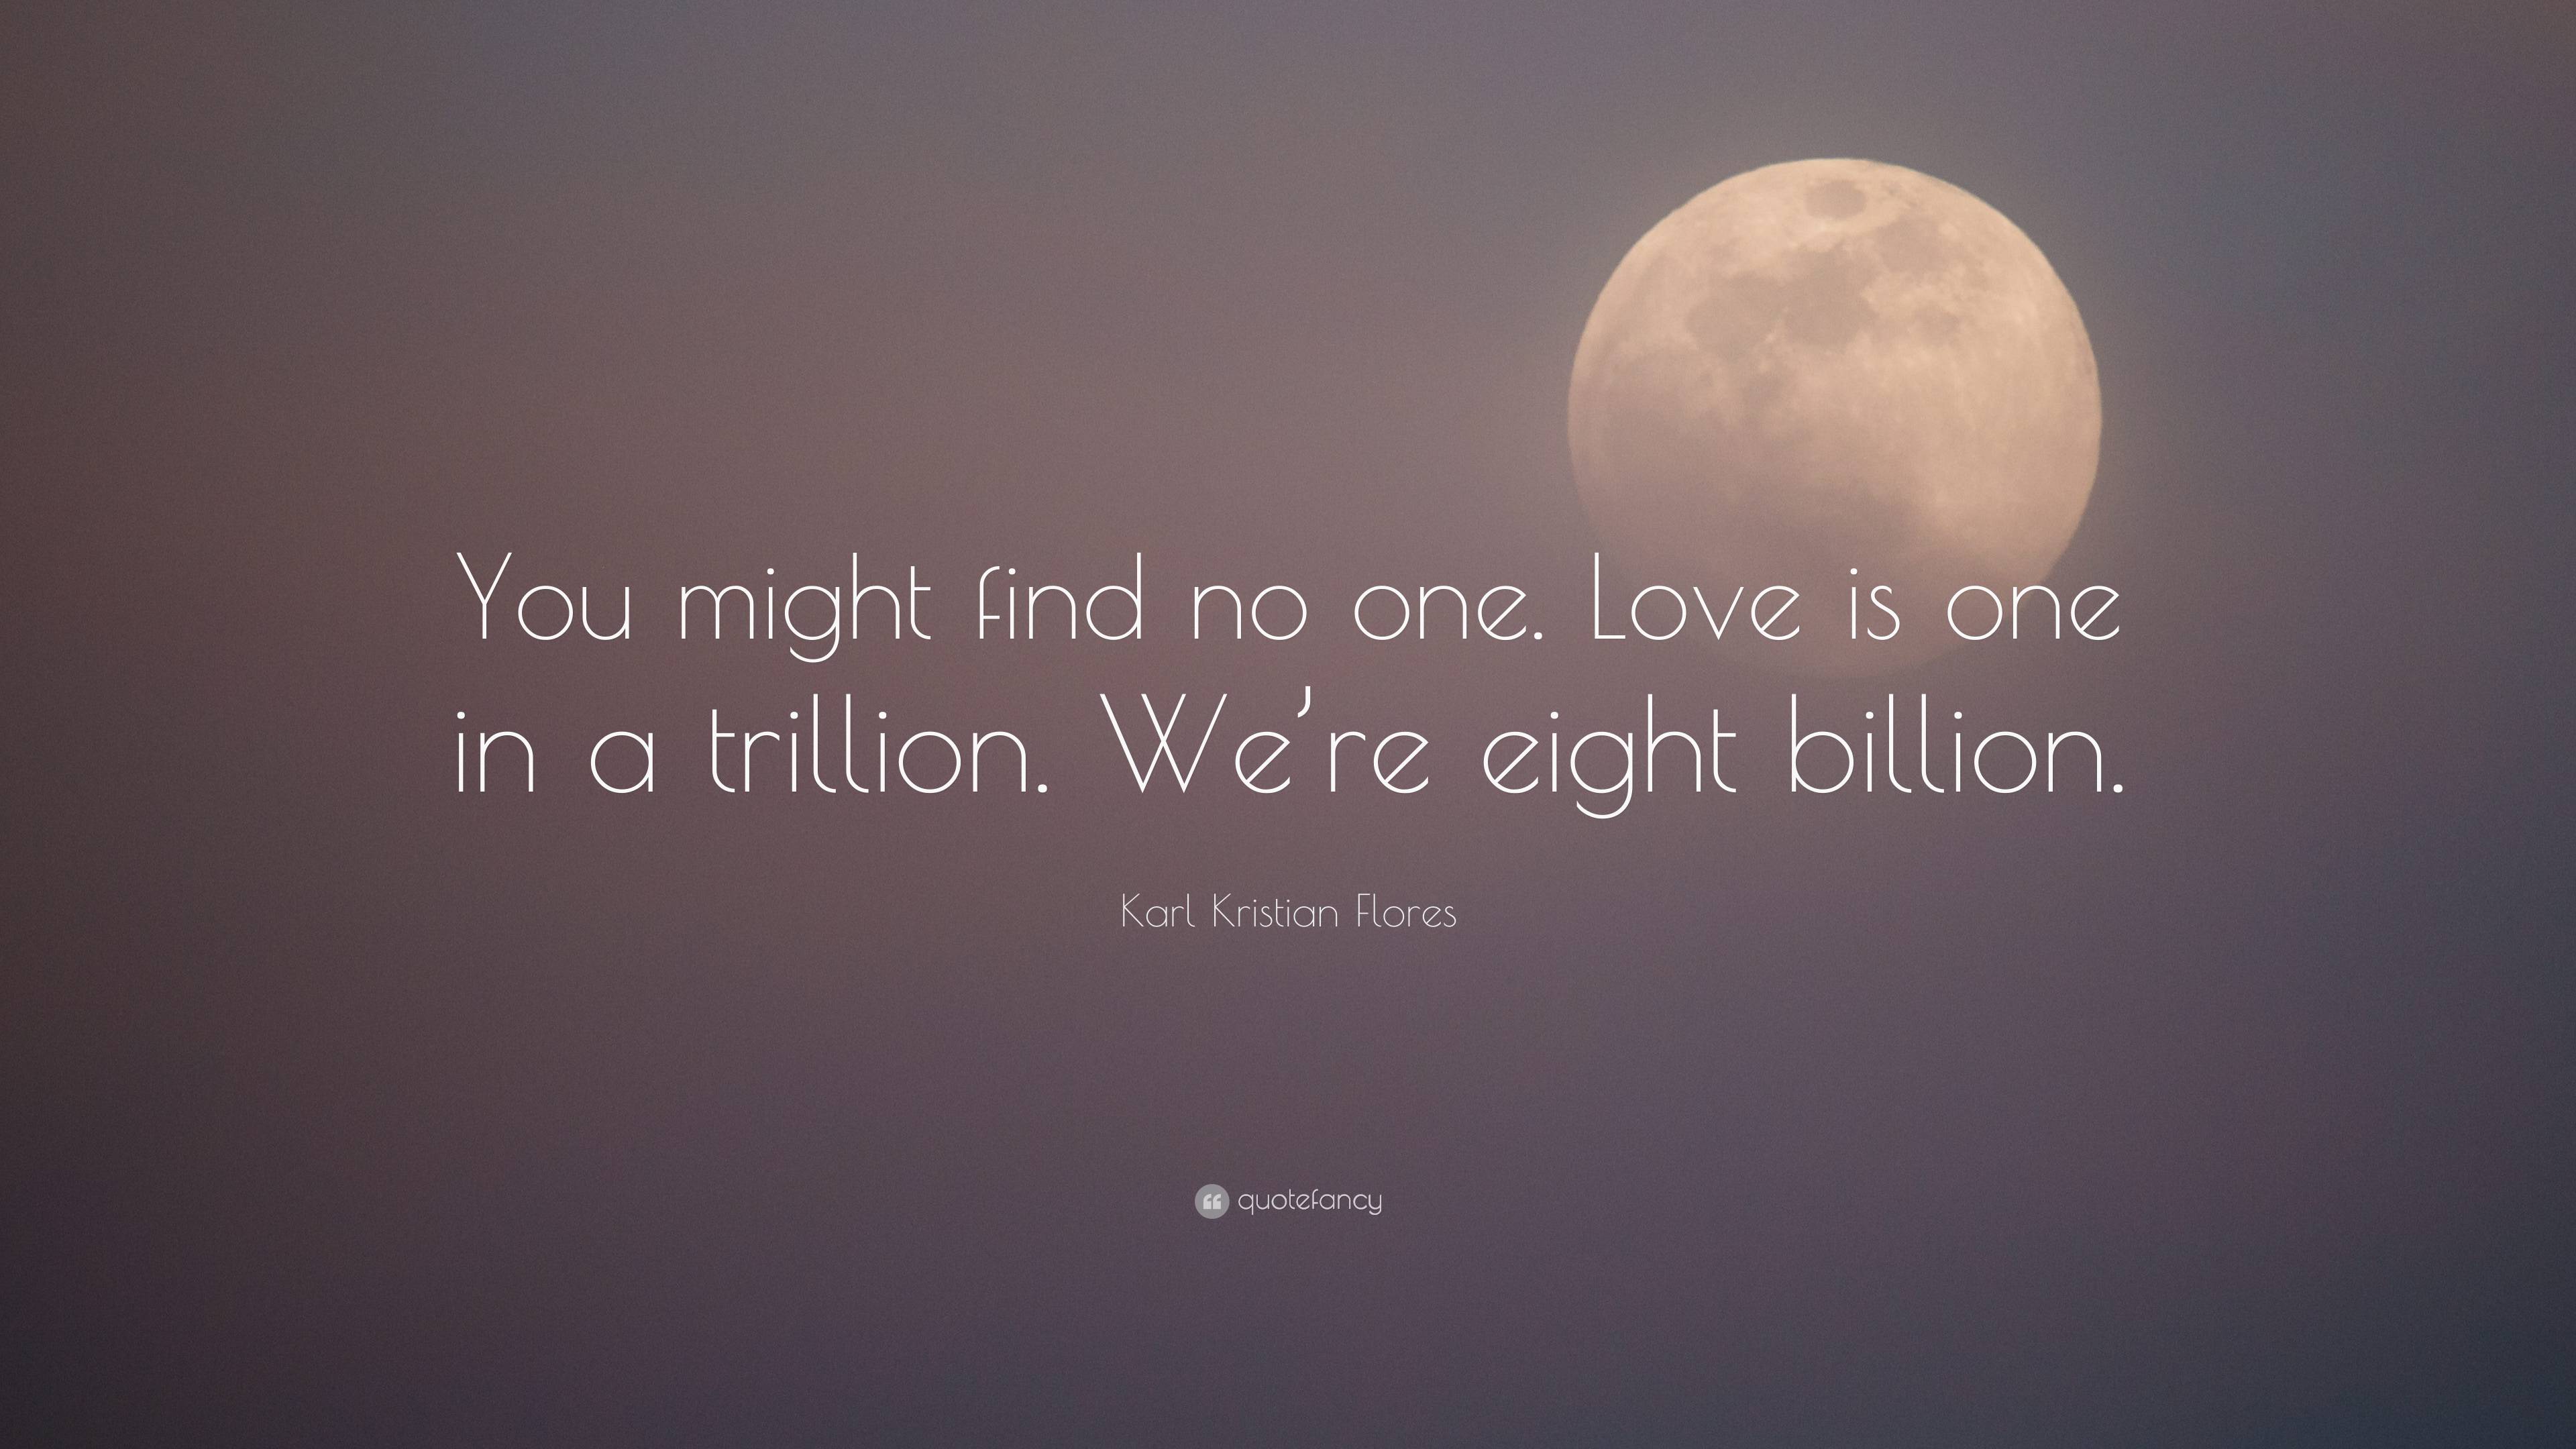 Karl Kristian Flores Quote: “You might find no one. Love is one in a  trillion. We